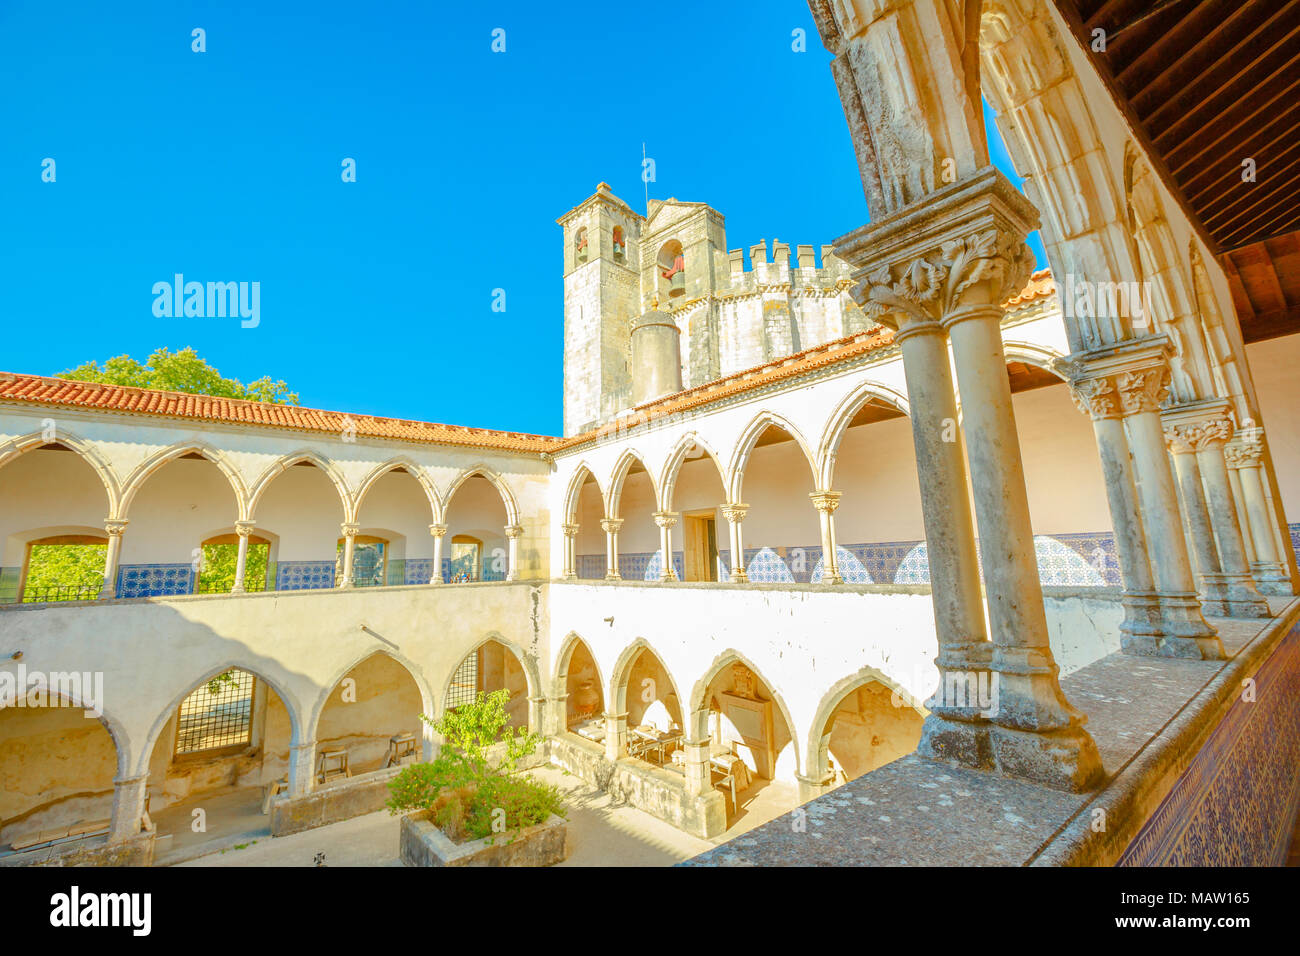 Tomar, Portugal - August 10, 2017: aerial view of Claustro da Lavagem with azulejos in Templar Castle of Tomar and Church of Convent of Christ on blue sky. Unesco Heritage and popular place. Stock Photo